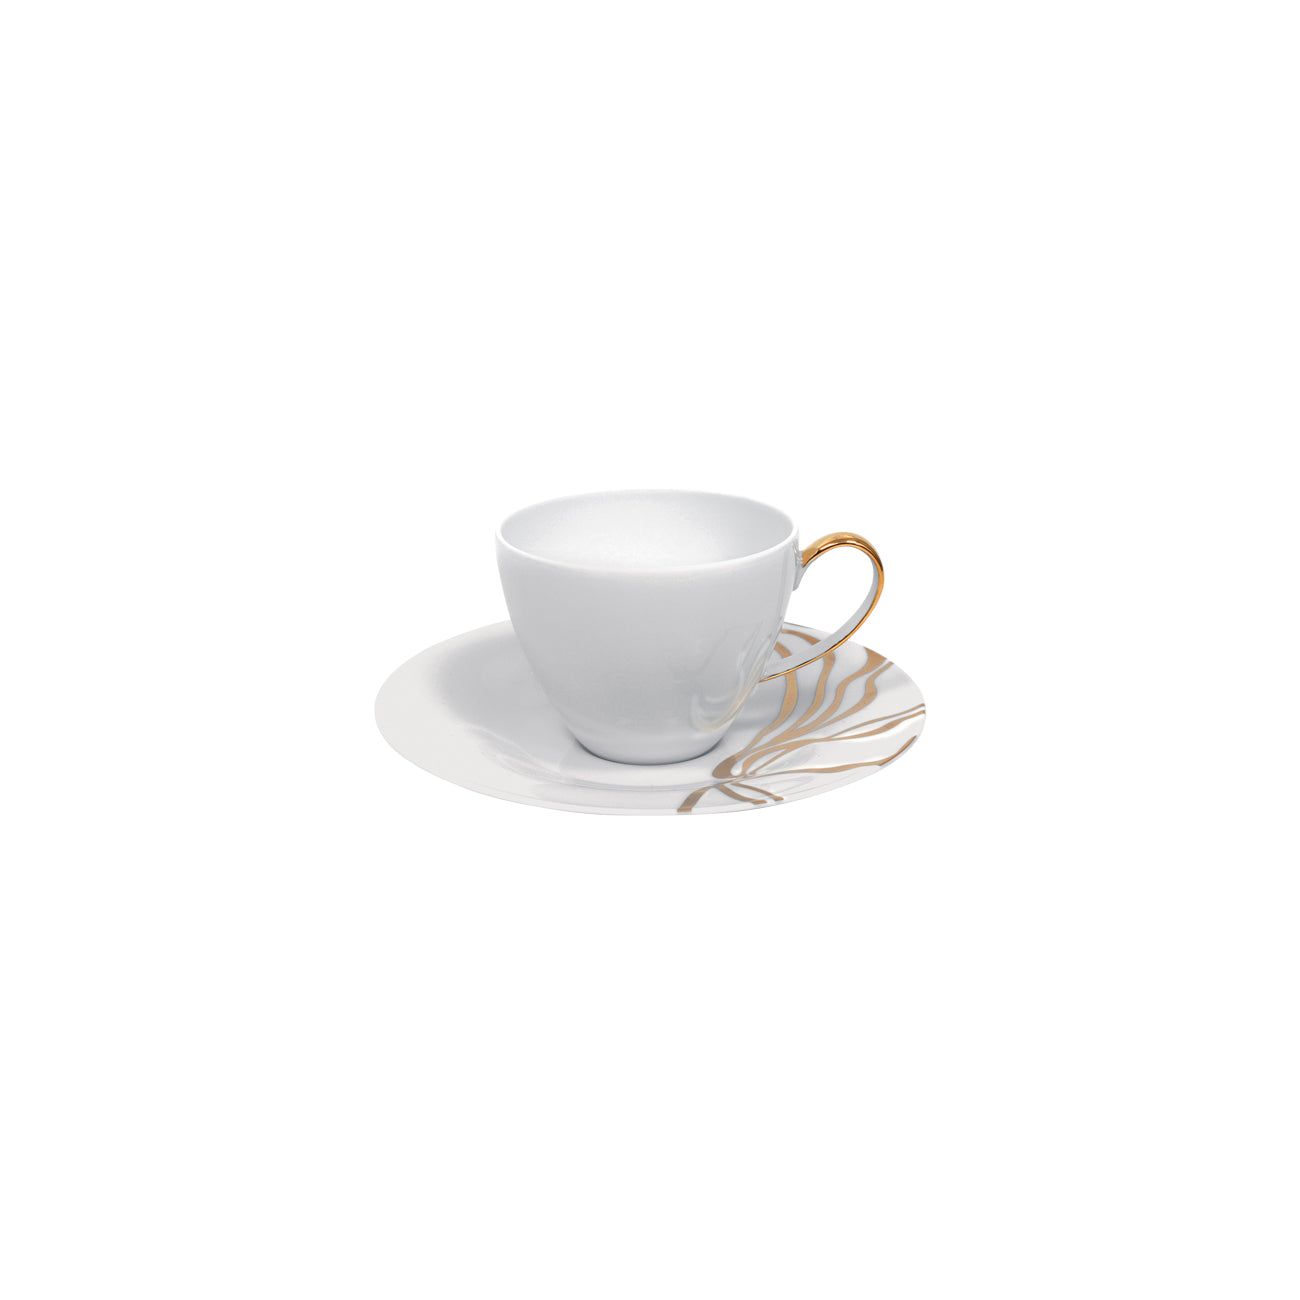 Fiume D'Oro Tea Cup + Saucer (Set of 4)